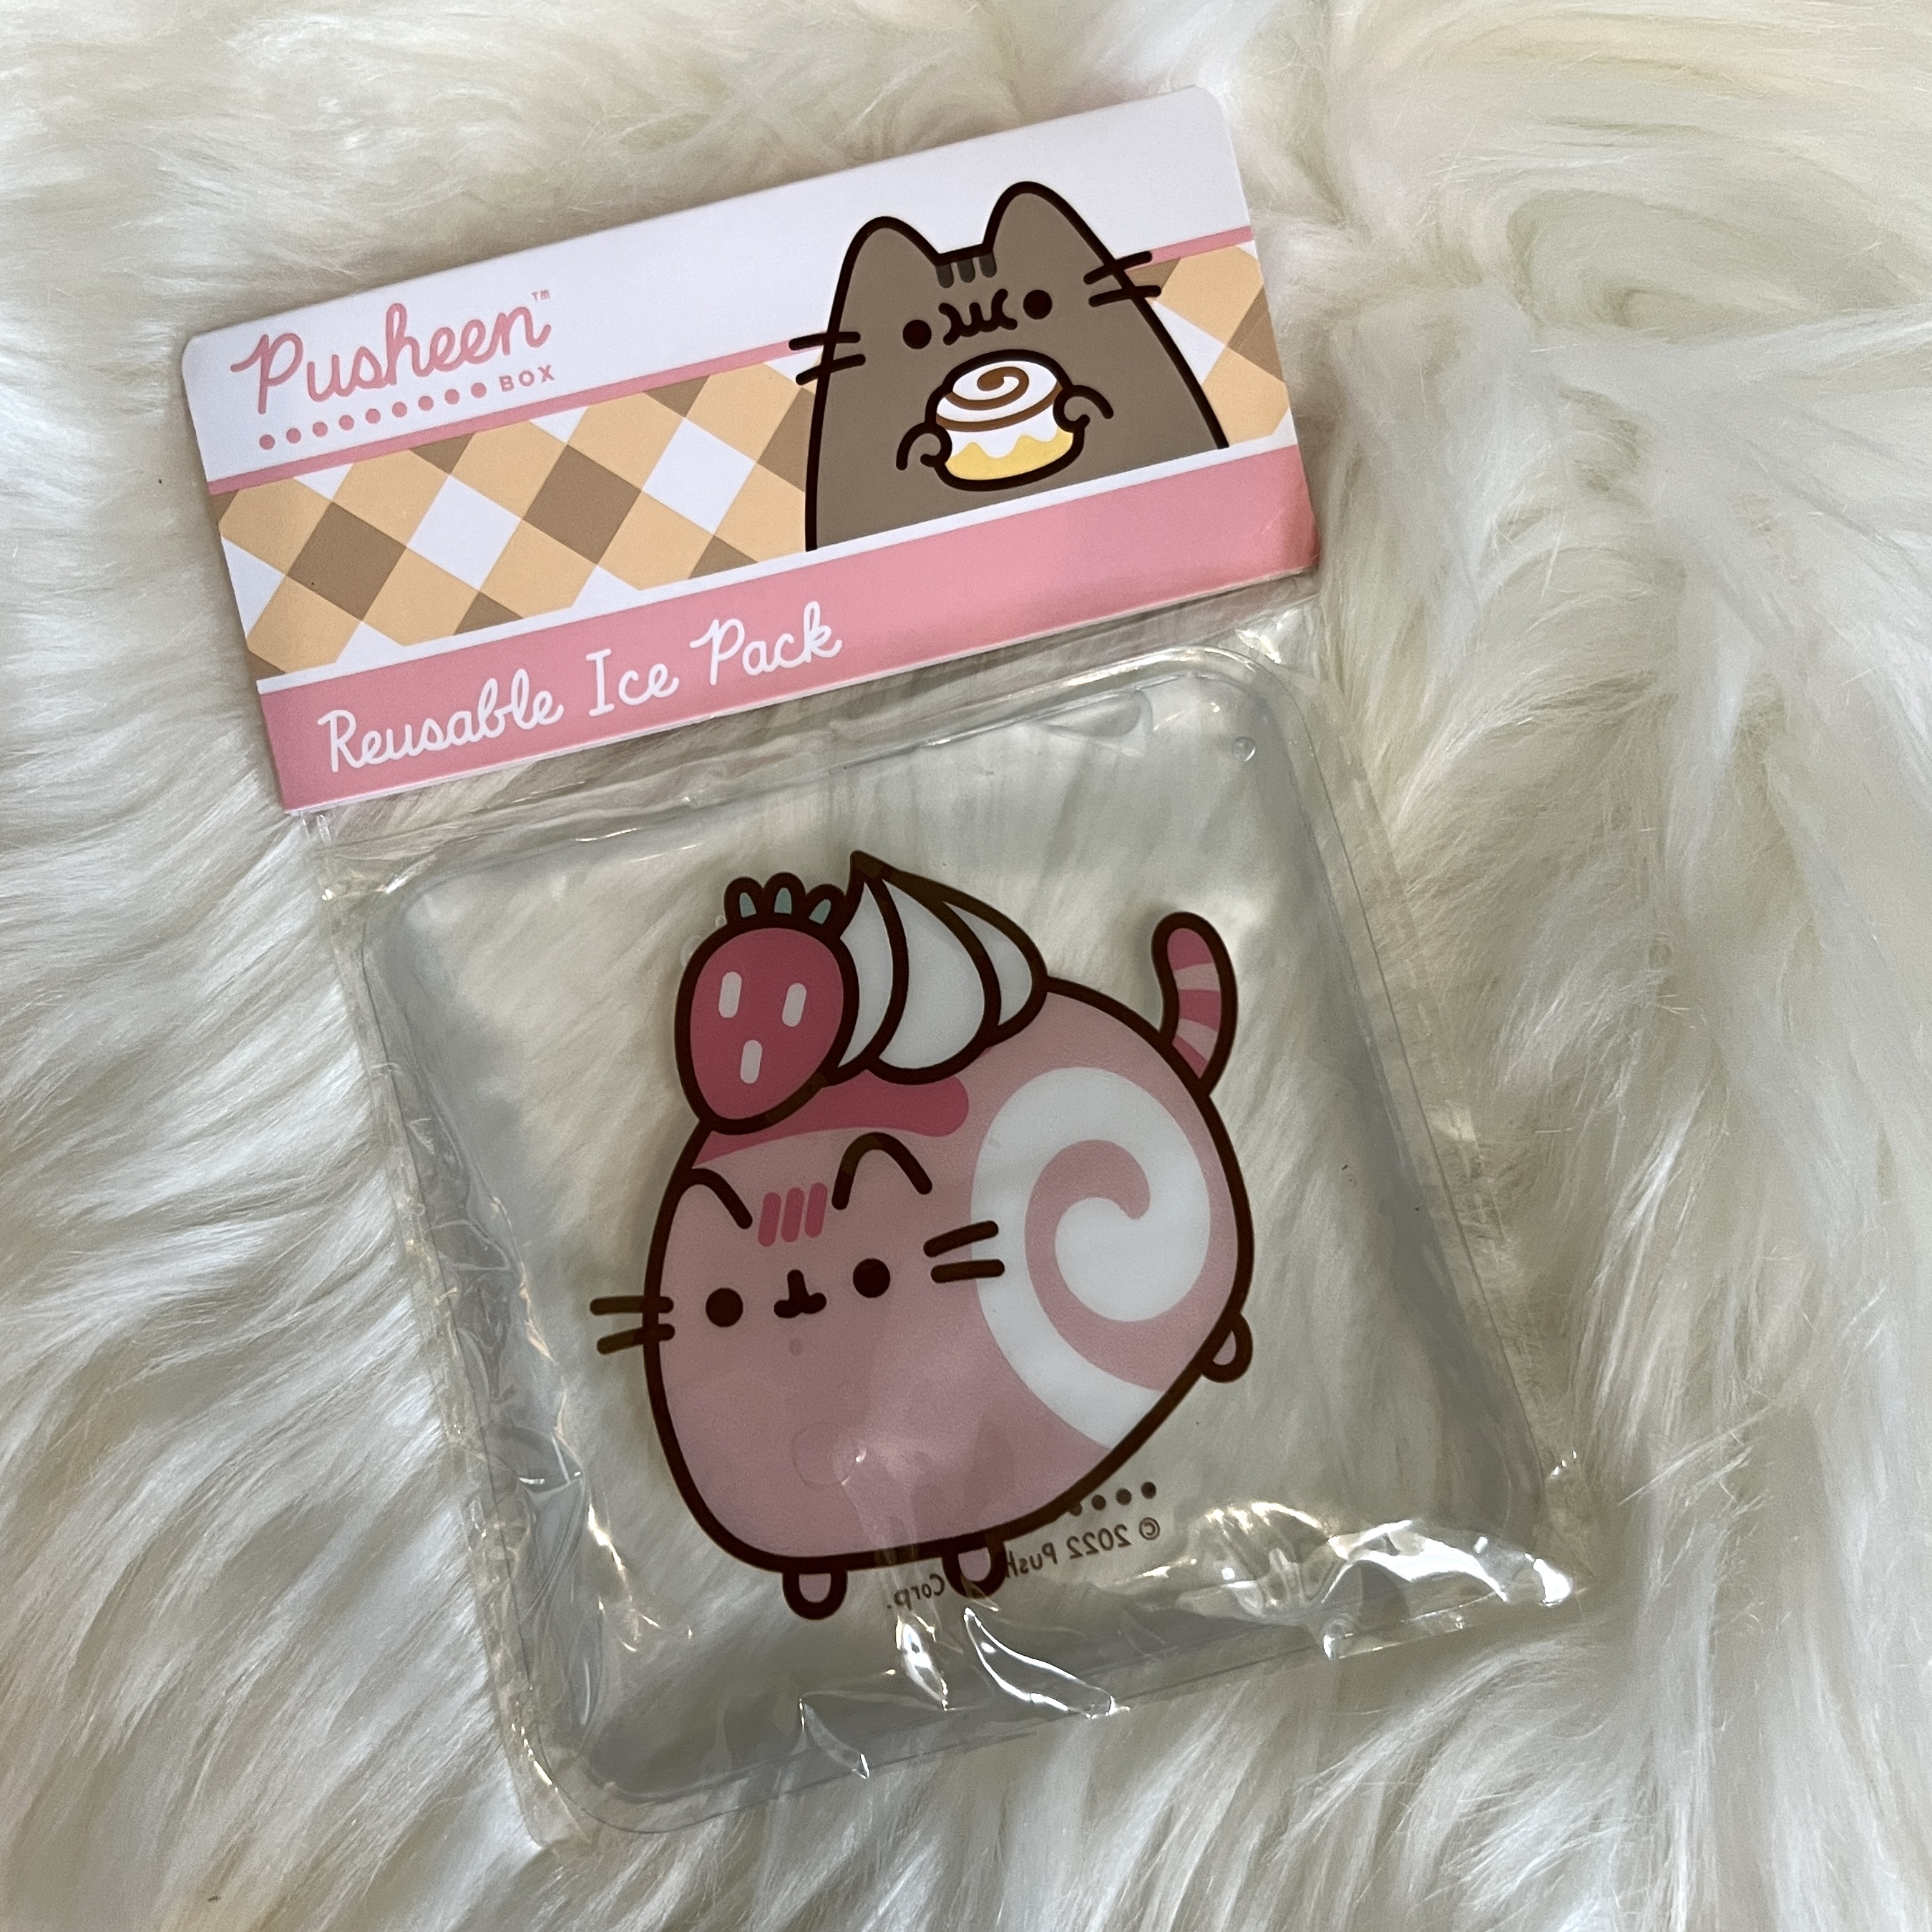 Ice Pack for Pusheen Box Summer 2022